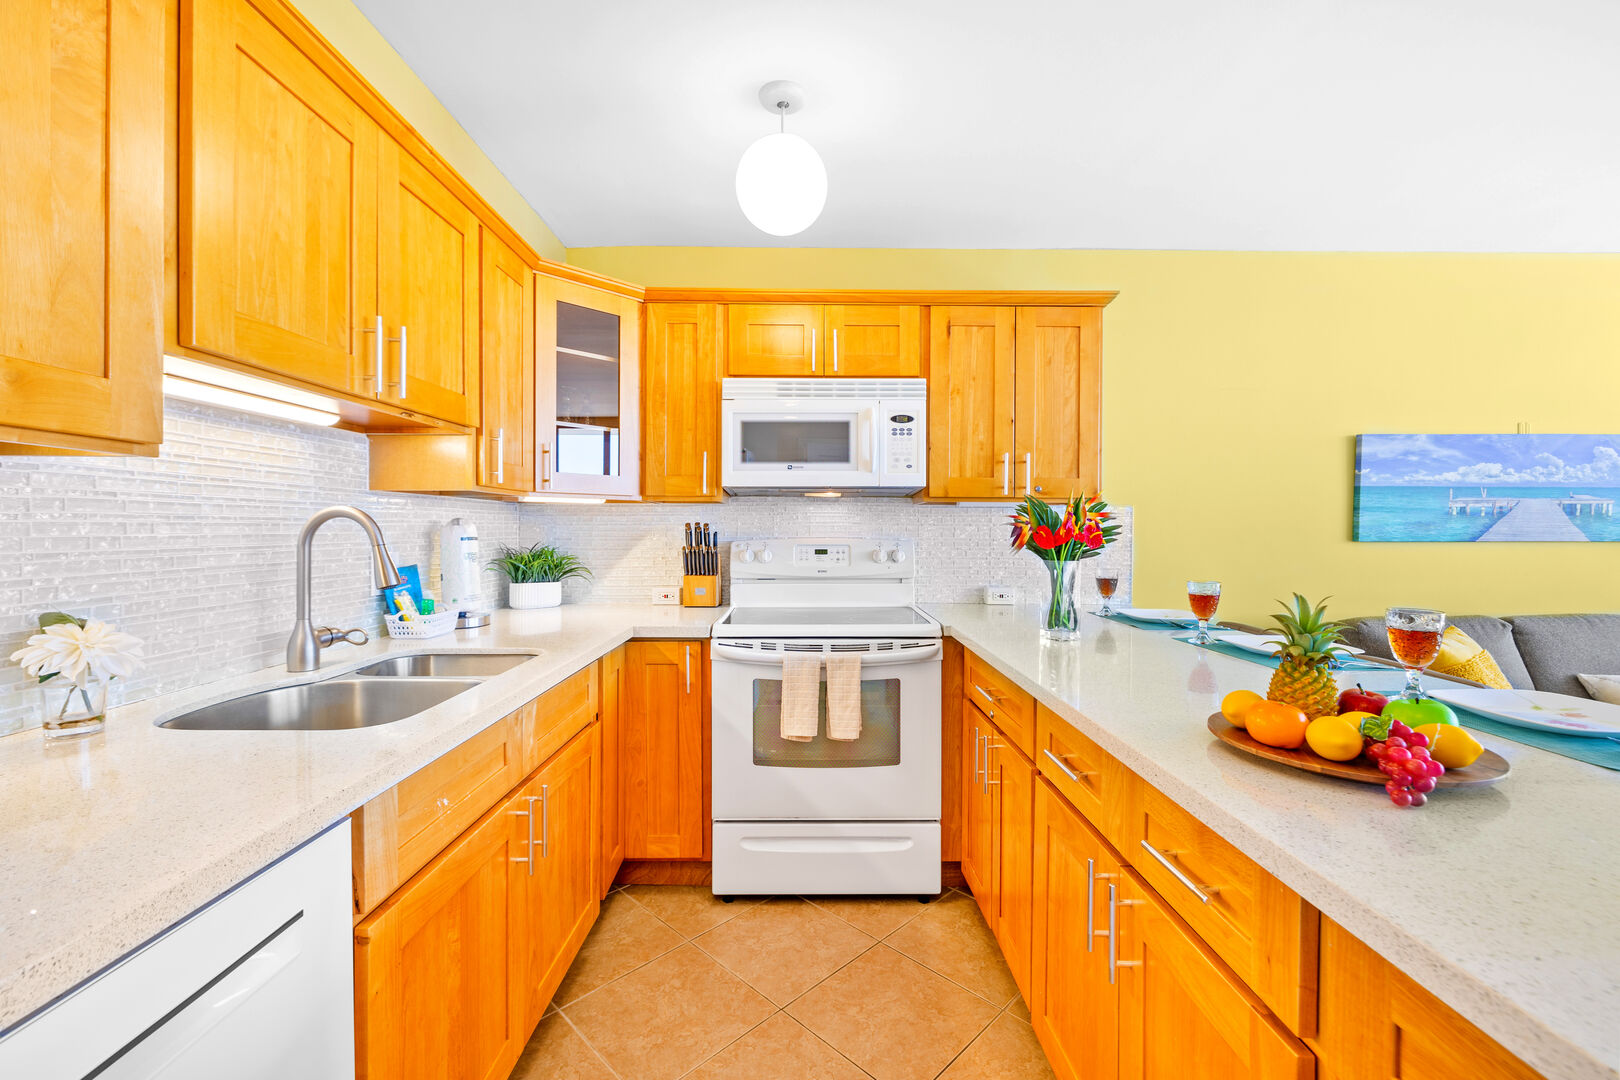 Fully equipped kitchen with dishwasher for your culinary needs.